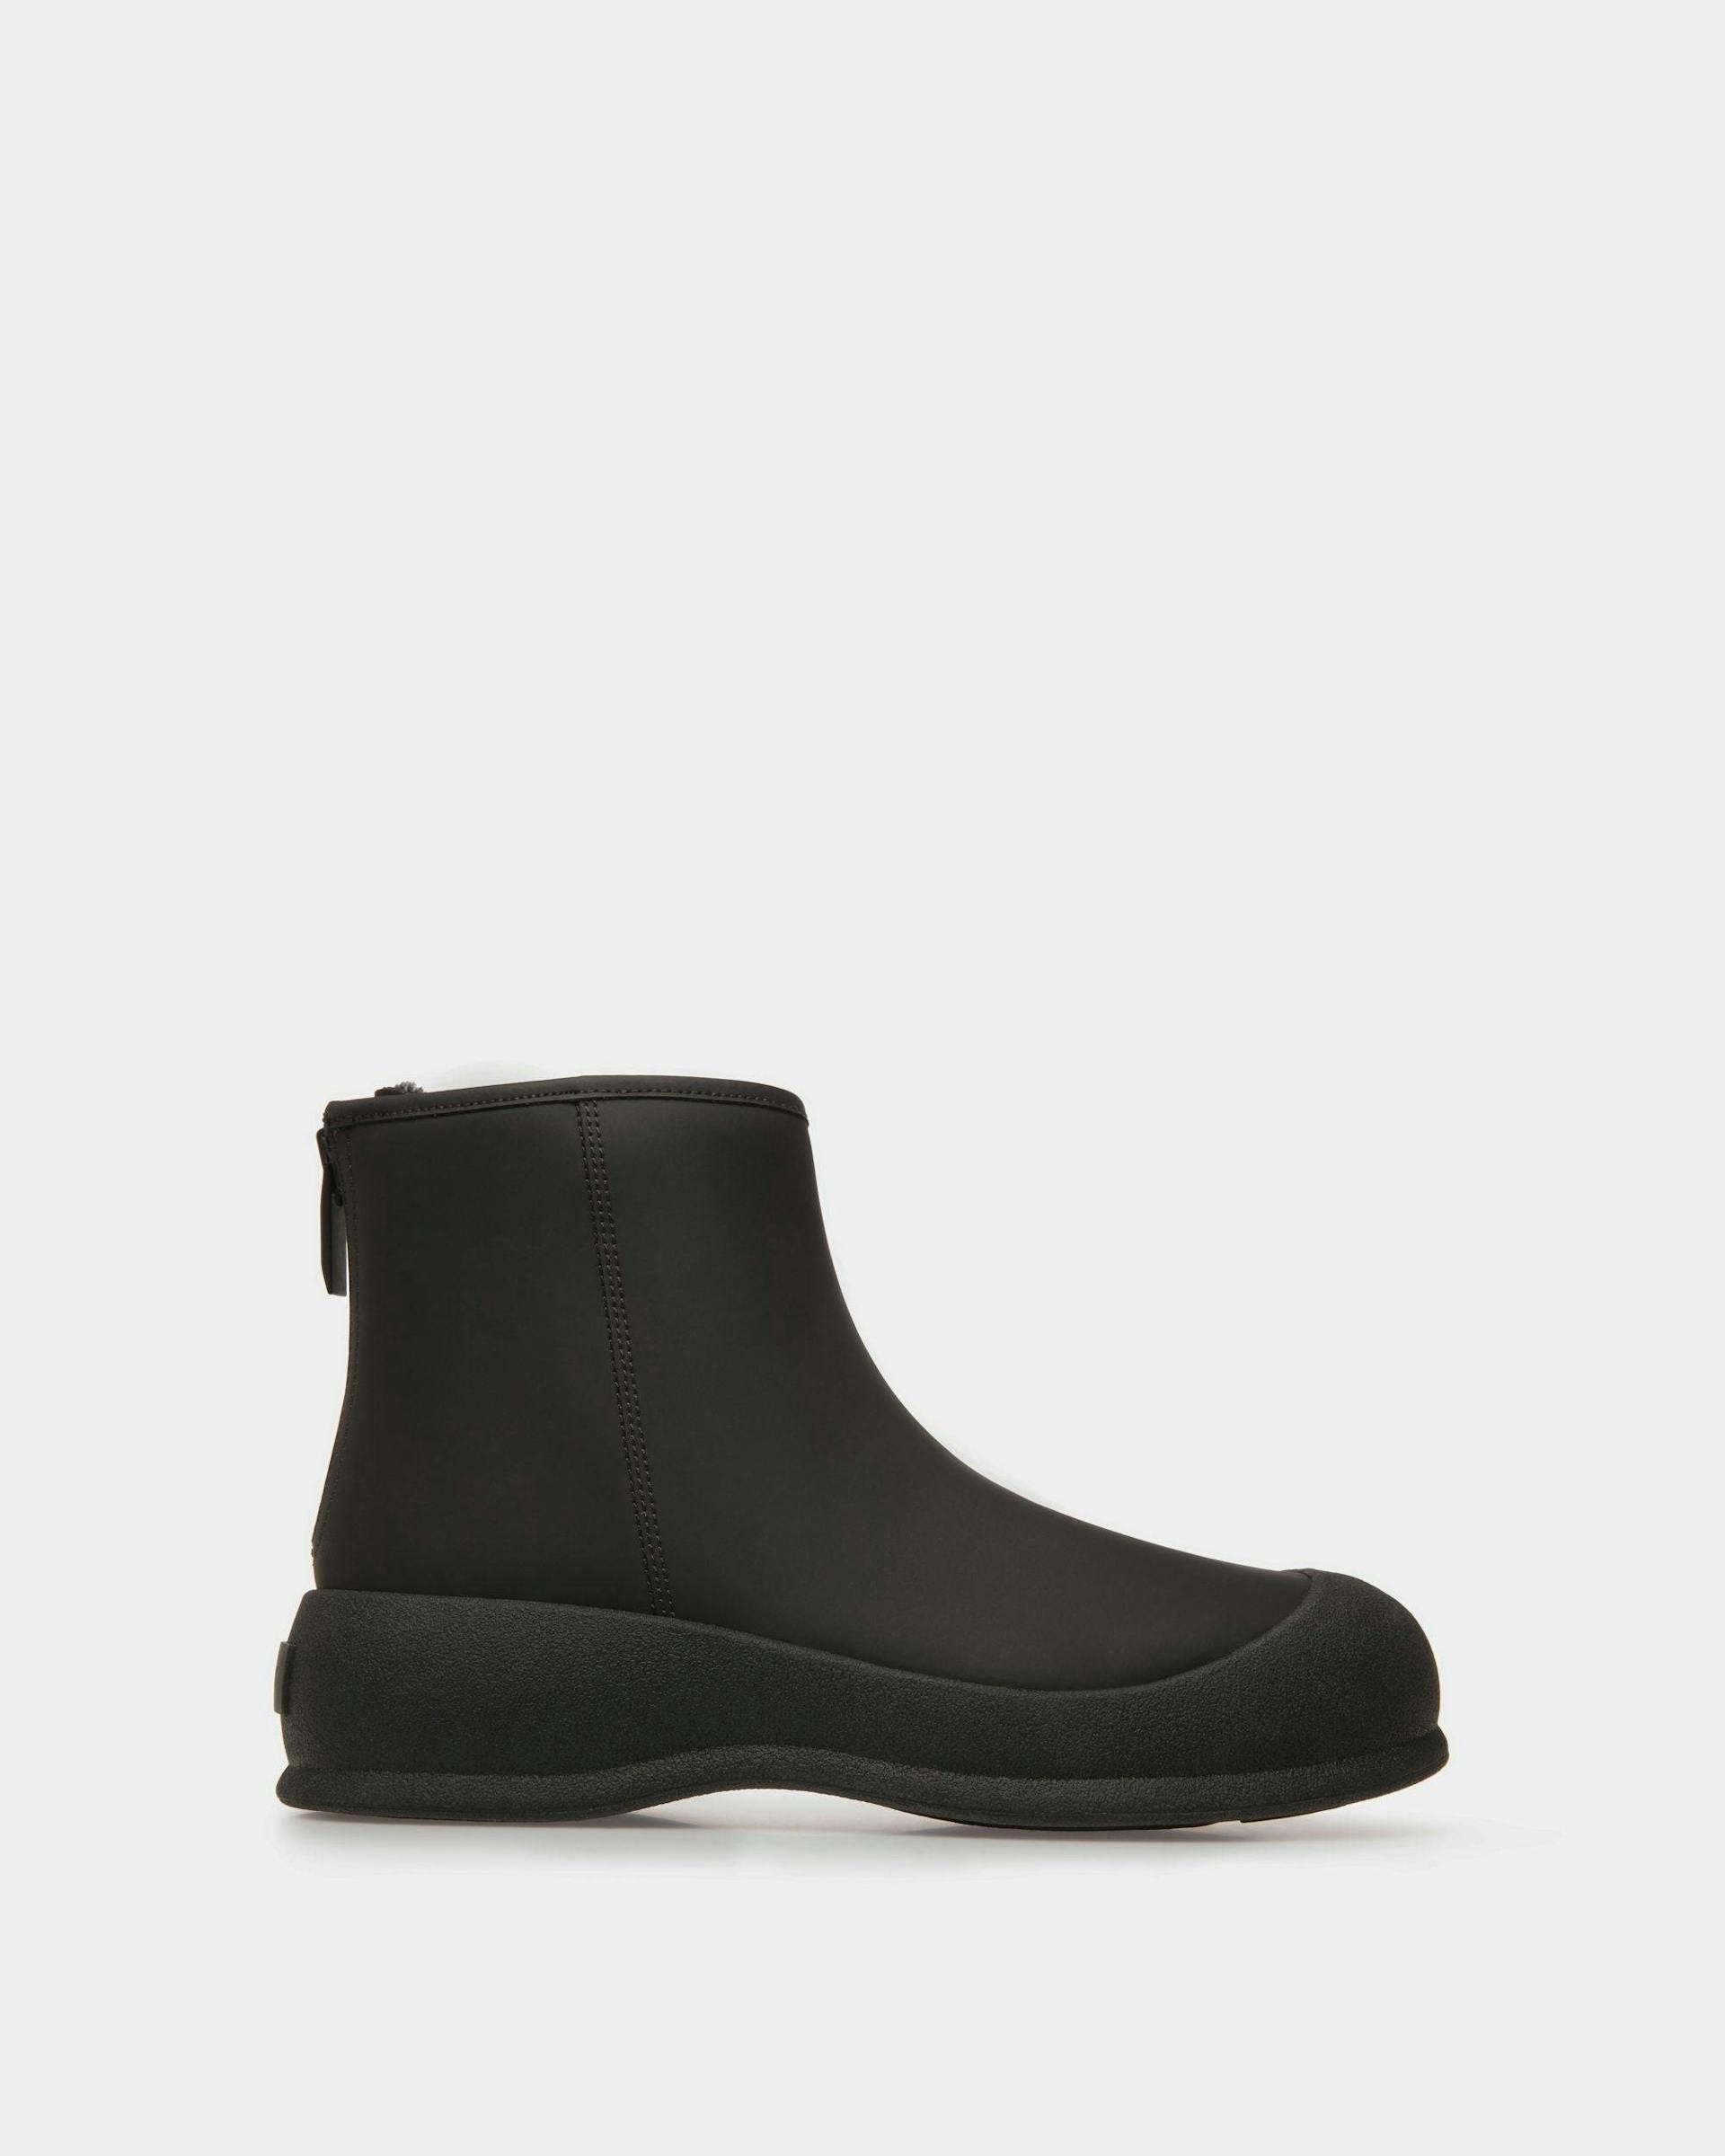 Women's Frei Snow Boots In Black Leather | Bally | Still Life Side